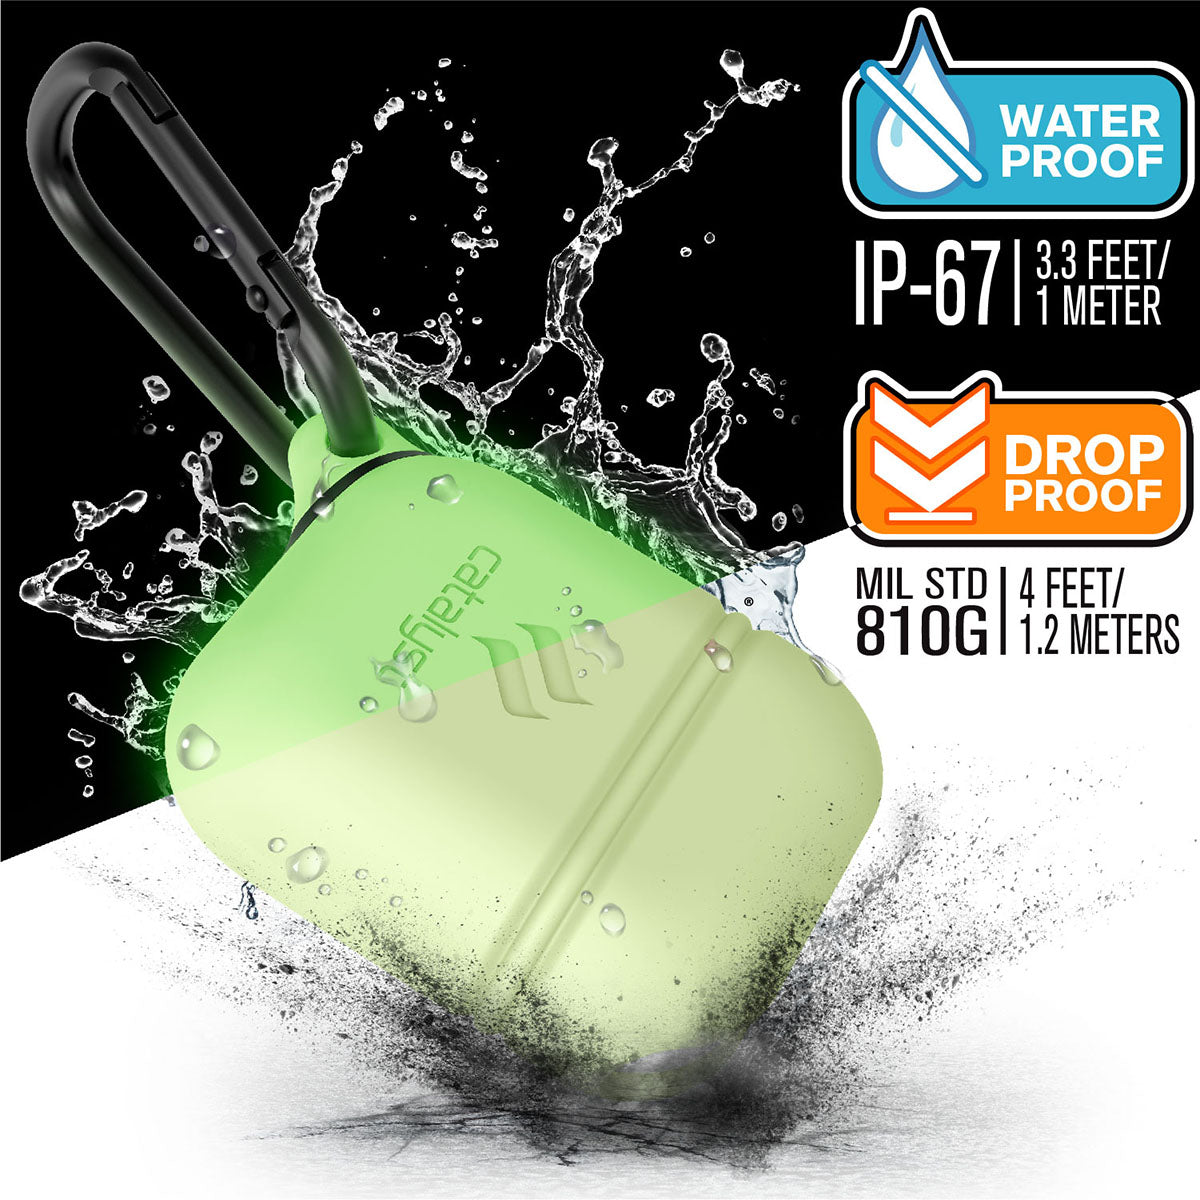 Catalyst airpods gen2/1 waterproof case + carabiner showing the case drop proof and water proof features with attached carabiner in glow in the dark text reads water proof IP-67 3.3 FEET/1 METER DROP PROOF MIL STD 810G 1.2 METERS